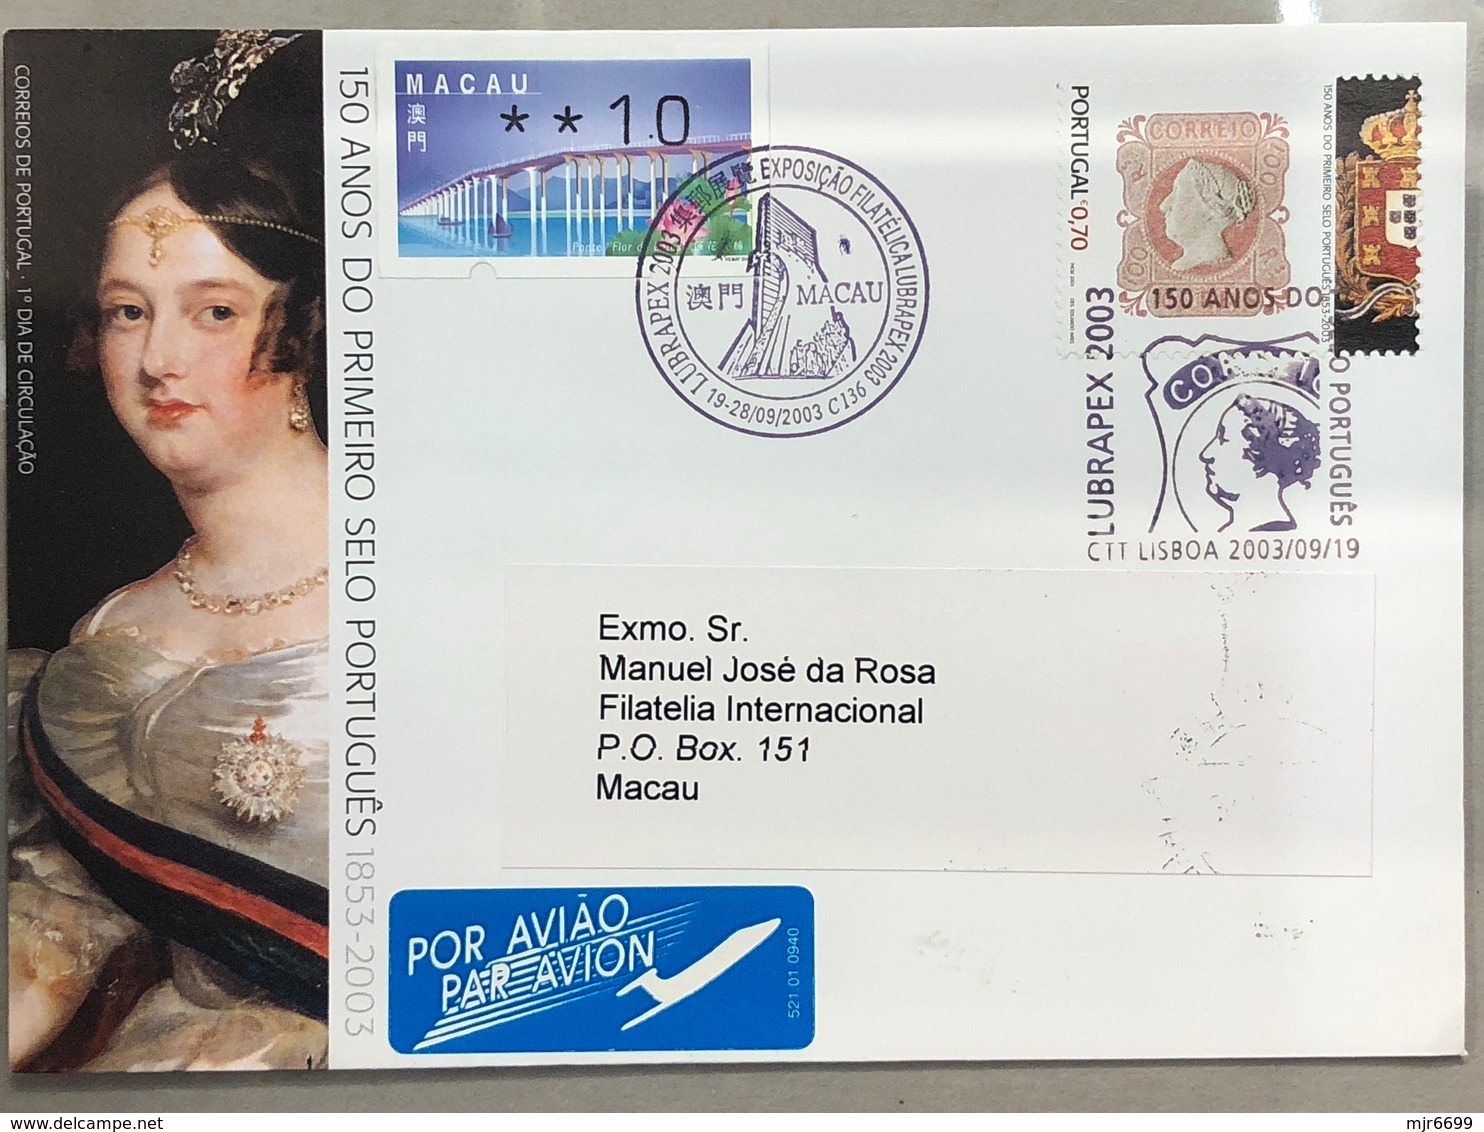 MACAU\PORTUGAL 2003 LUBRAPEX03 STAMP EXHIBITION COVER USED TO MACAU WITH 2 COUNTRY STAMPS AND CANCEL, RARE COMBINATION - FDC